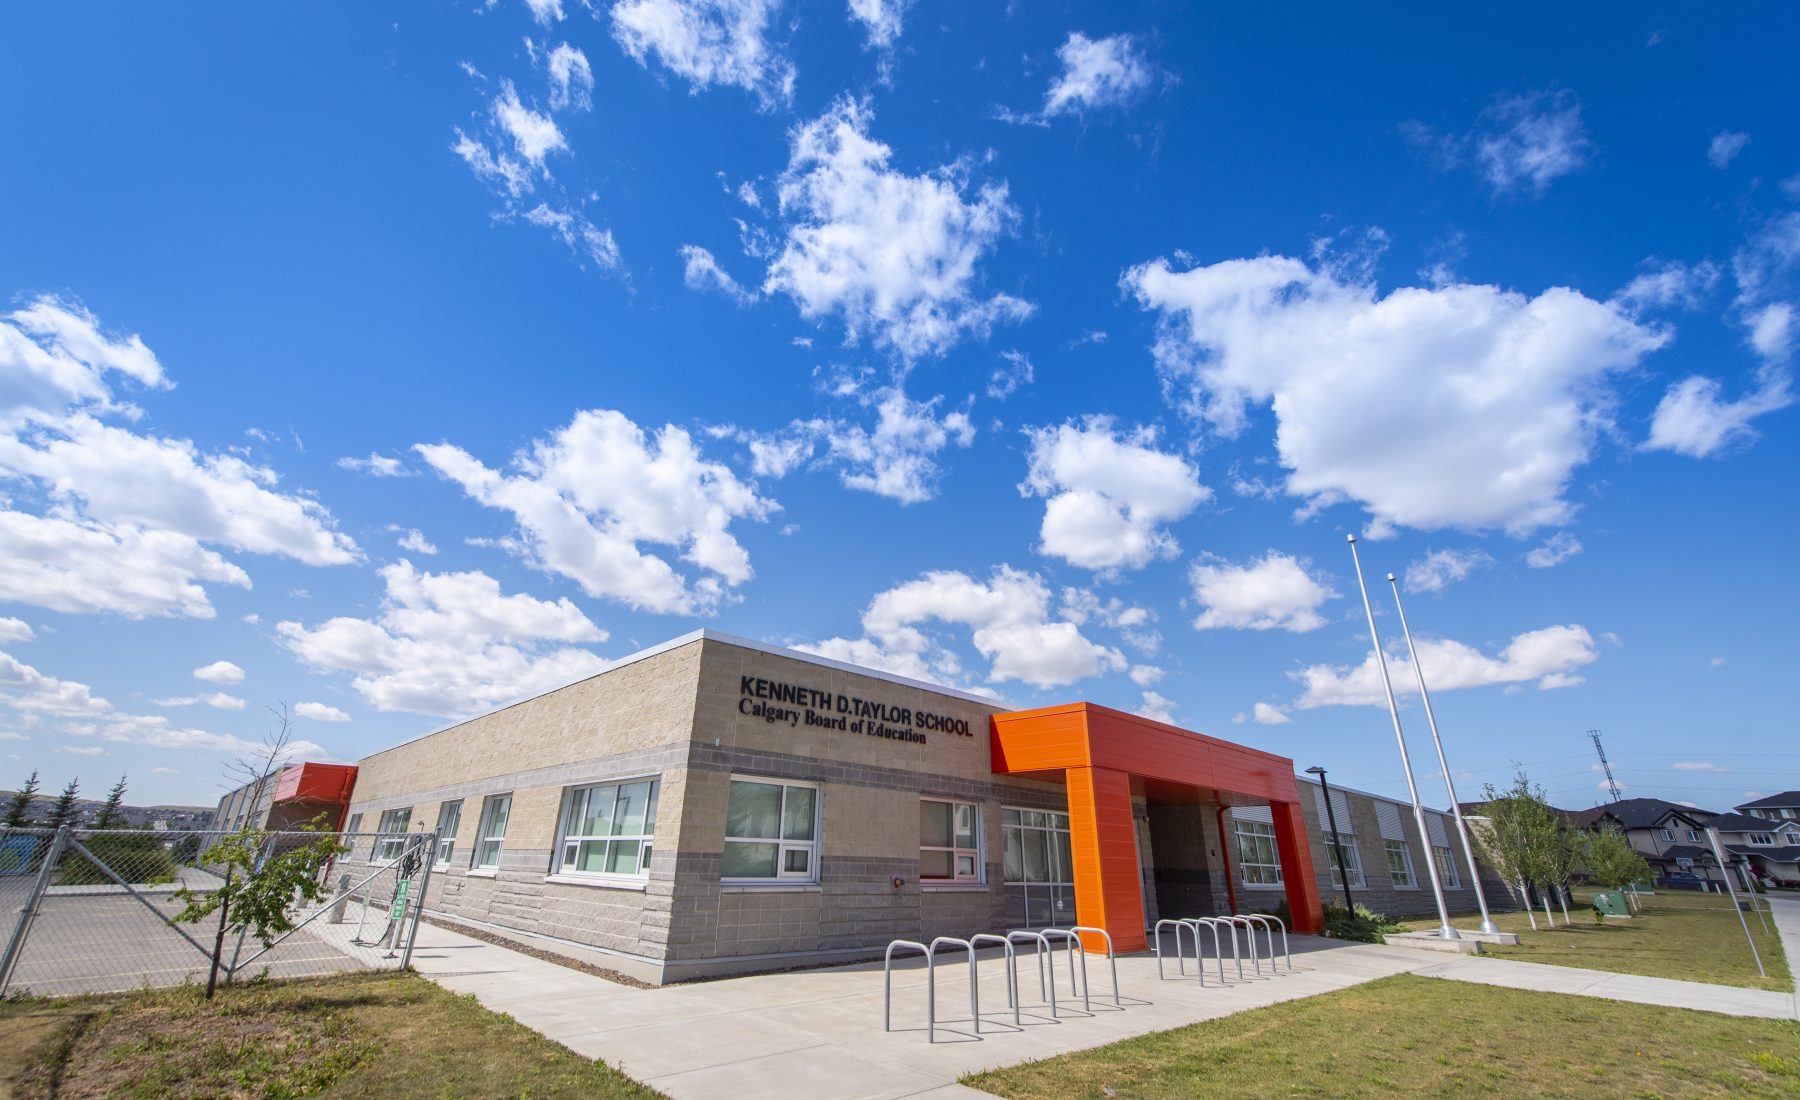 Top Rated Schools<br />
in NW Calgary